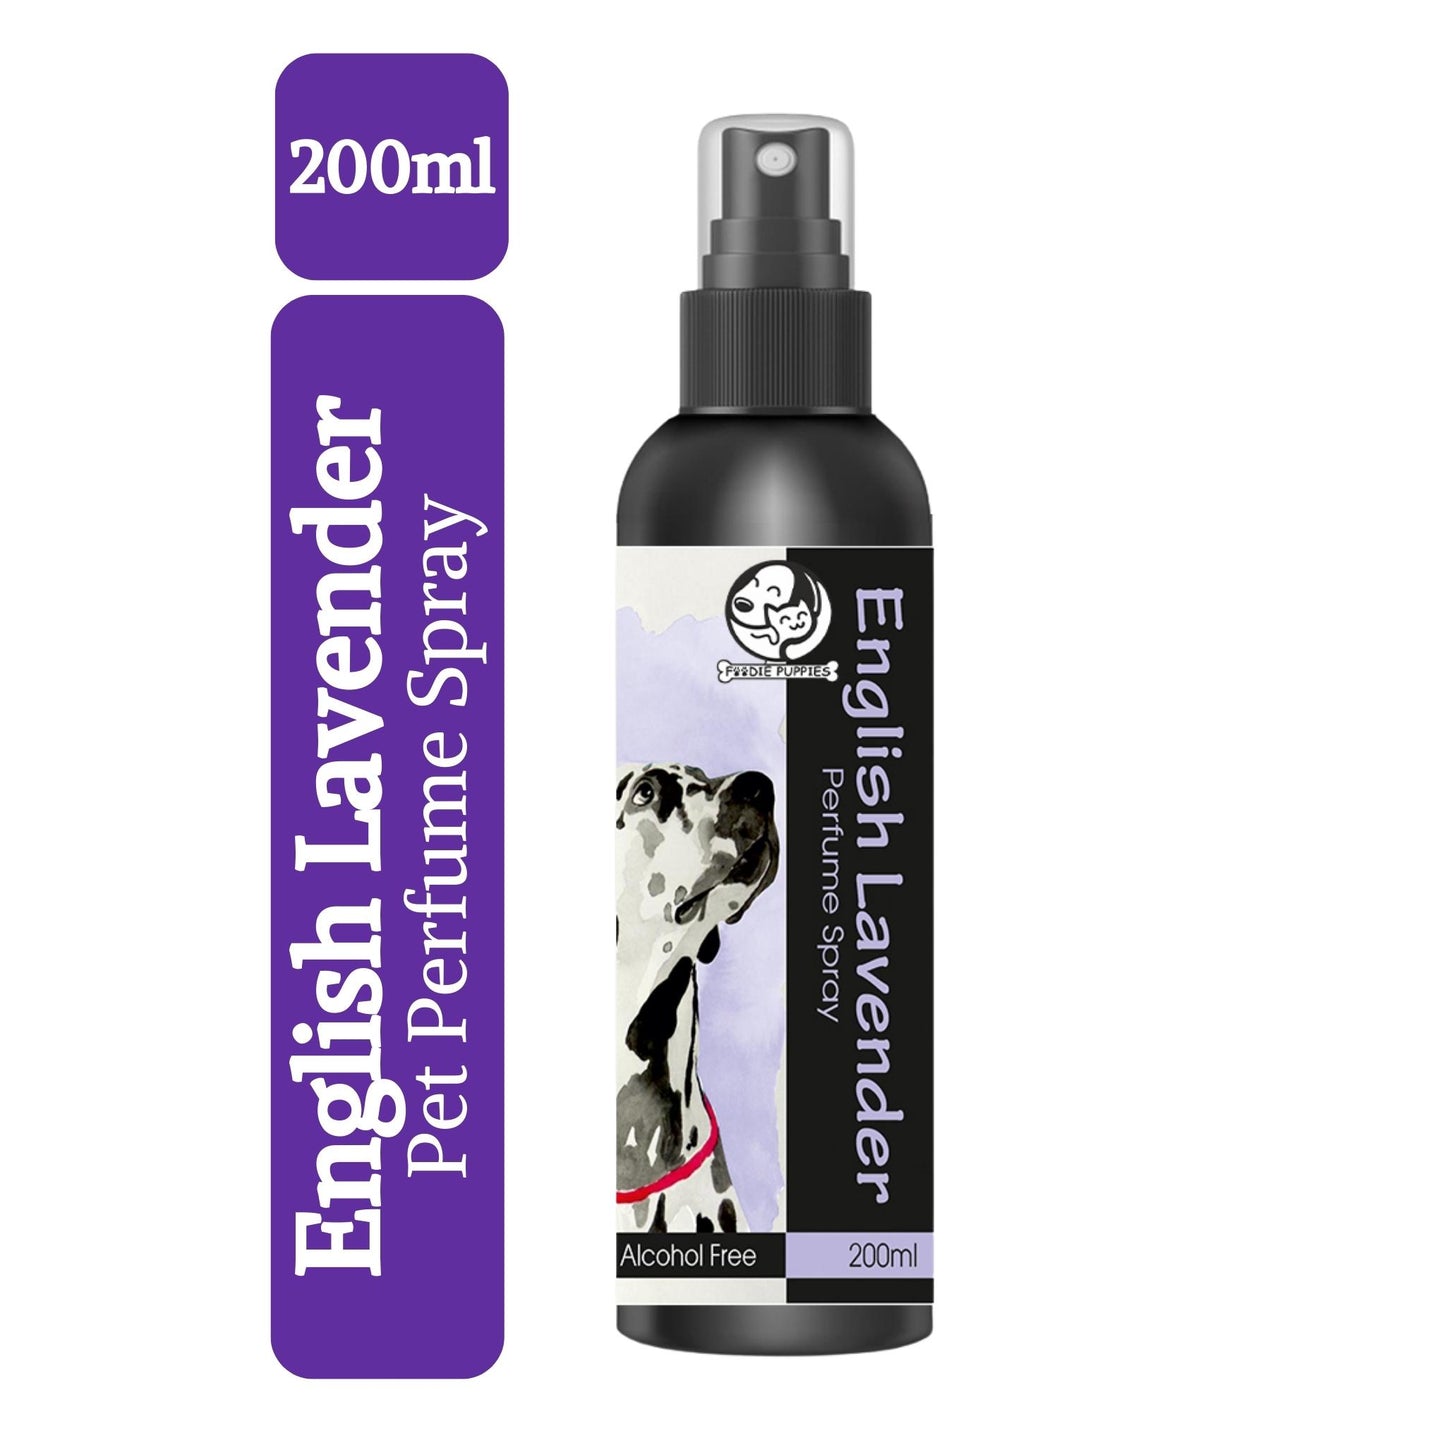 Foodie Puppies Pet Perfume Spray English Lavender for Dogs - 200 ml